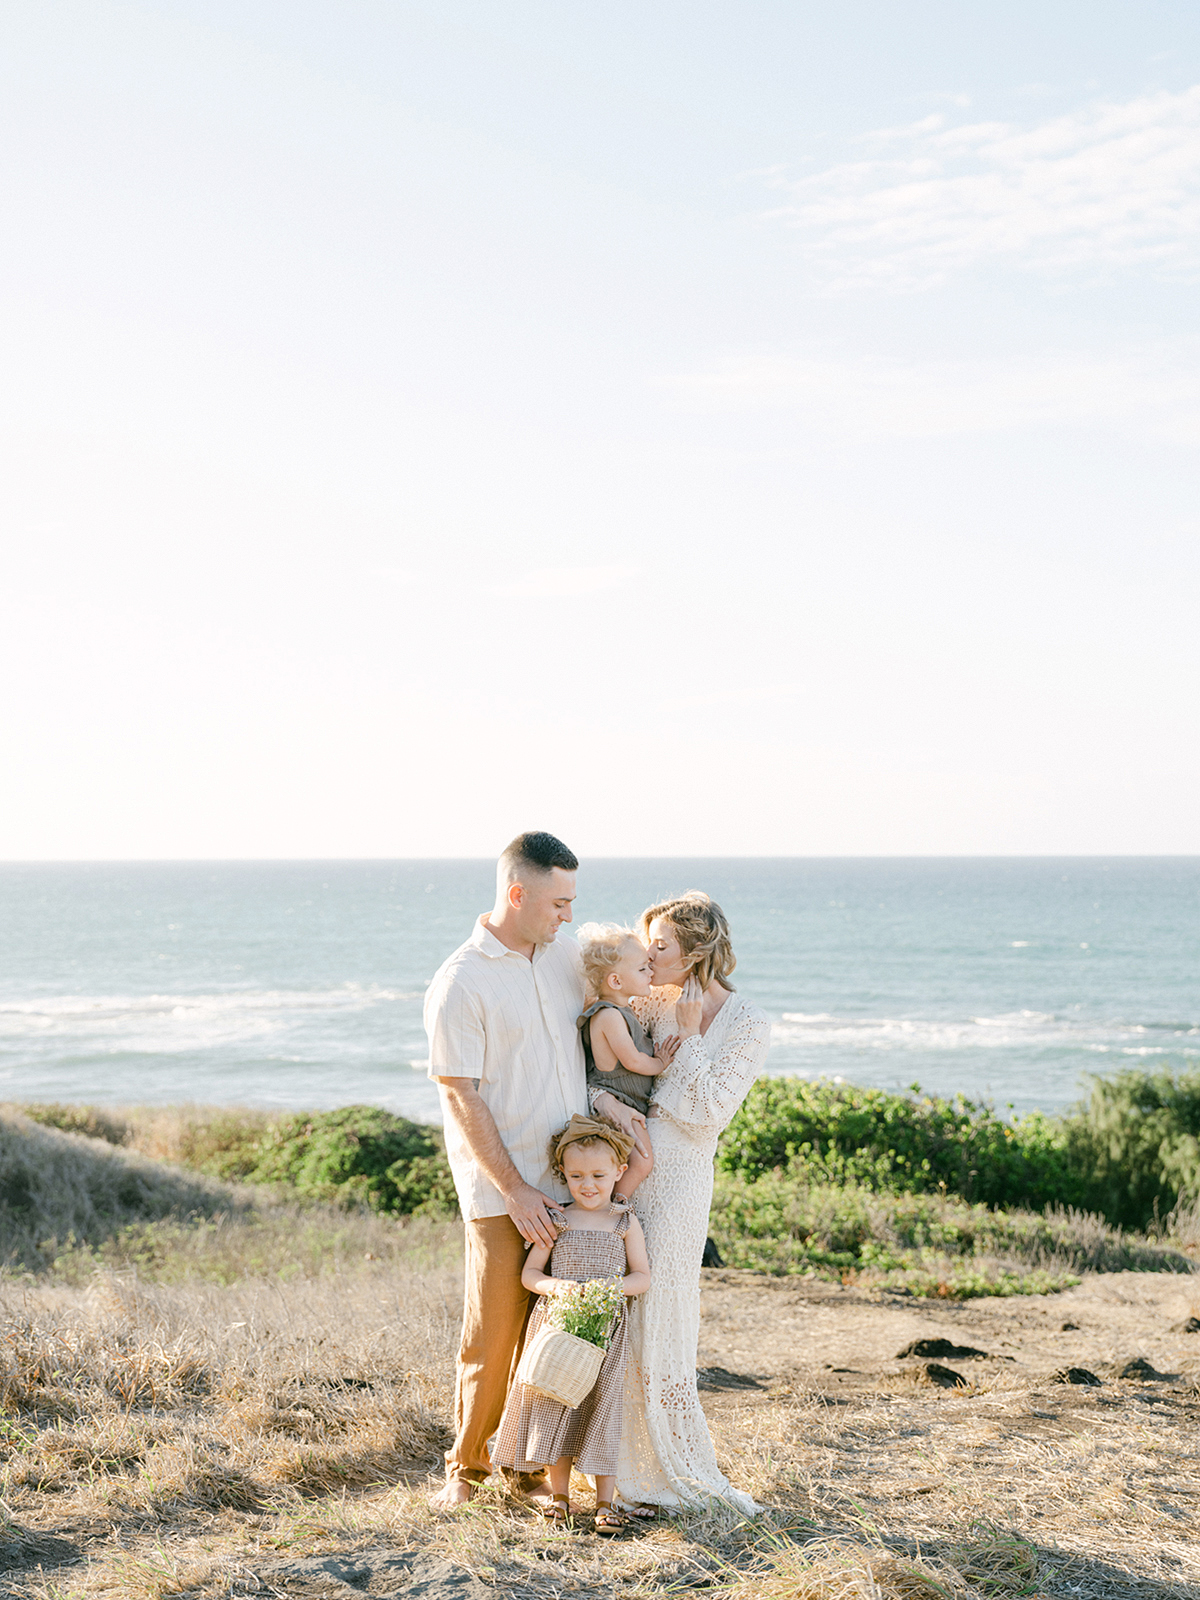 north shore family photographer, Laura Ivanova, captures this family of four on Oahu!